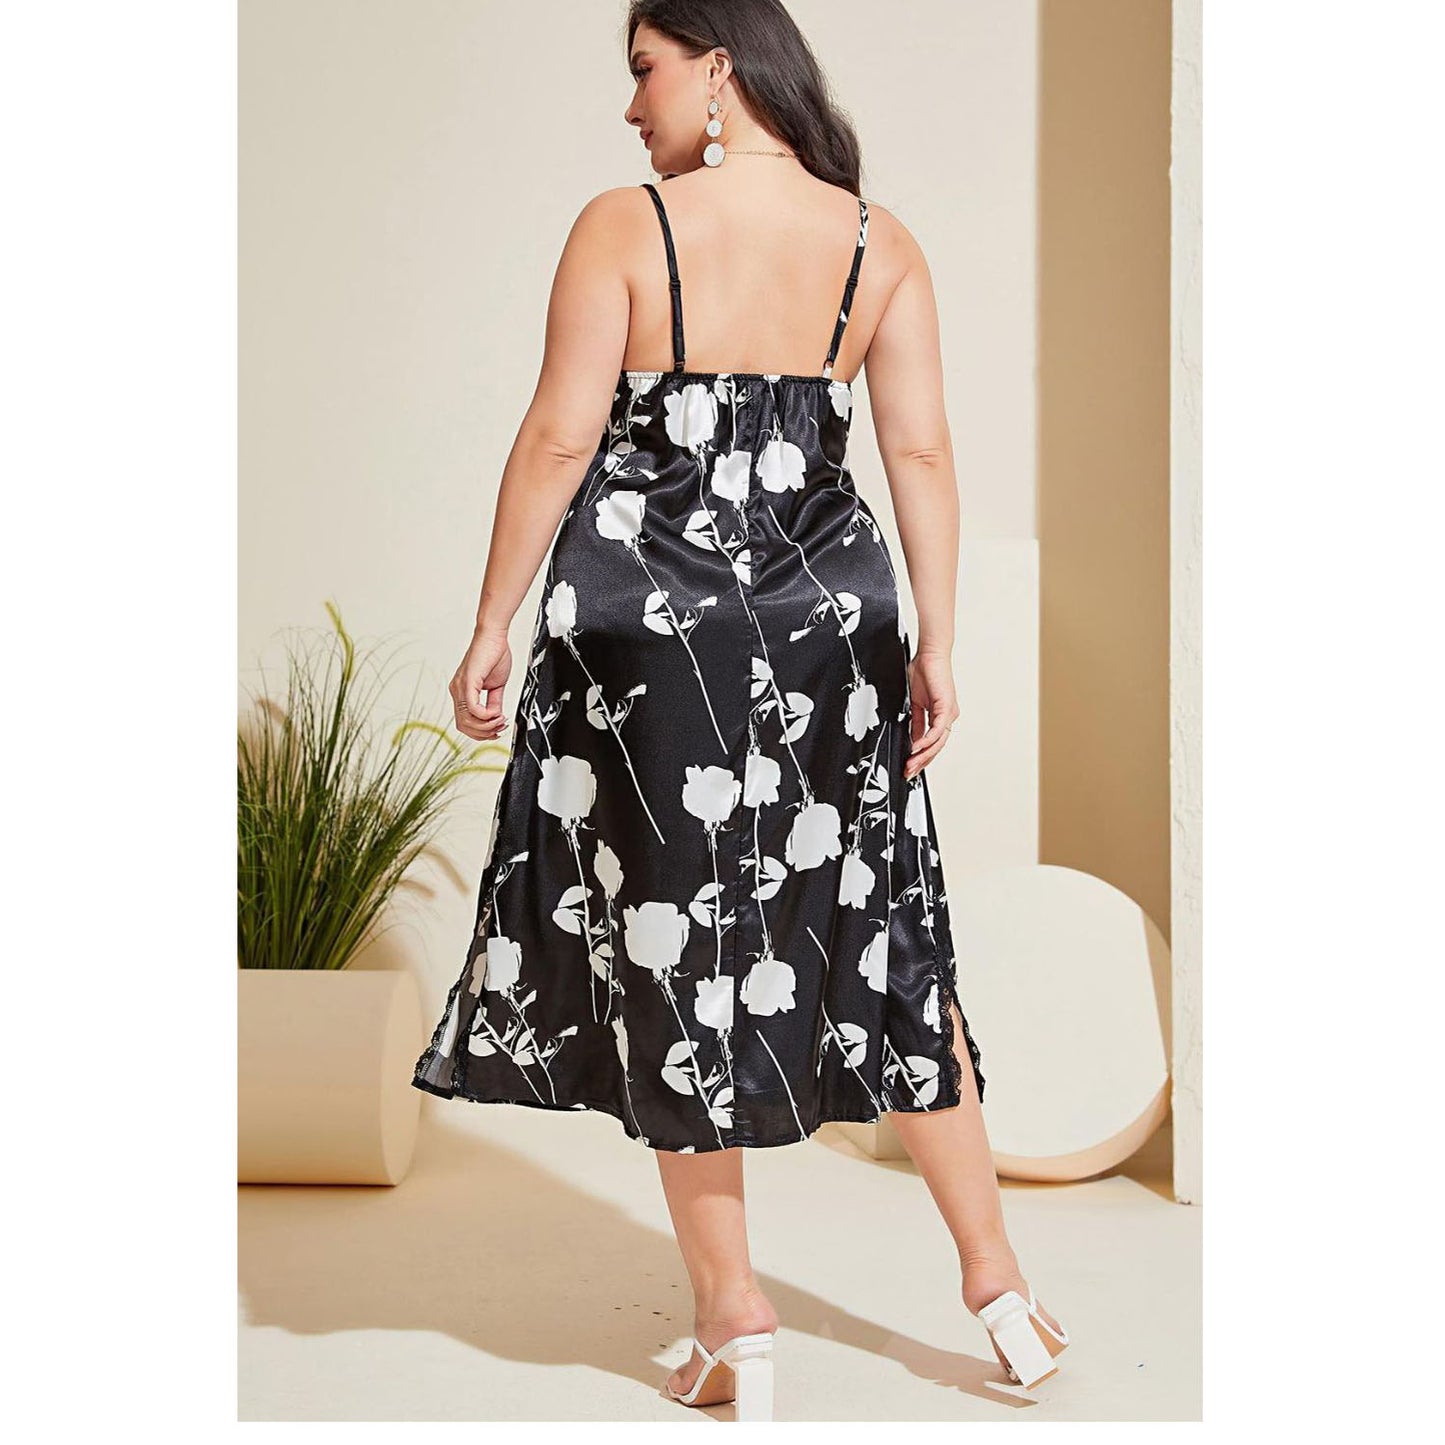 Back of Model wearing black plus size floral pattern nightgown